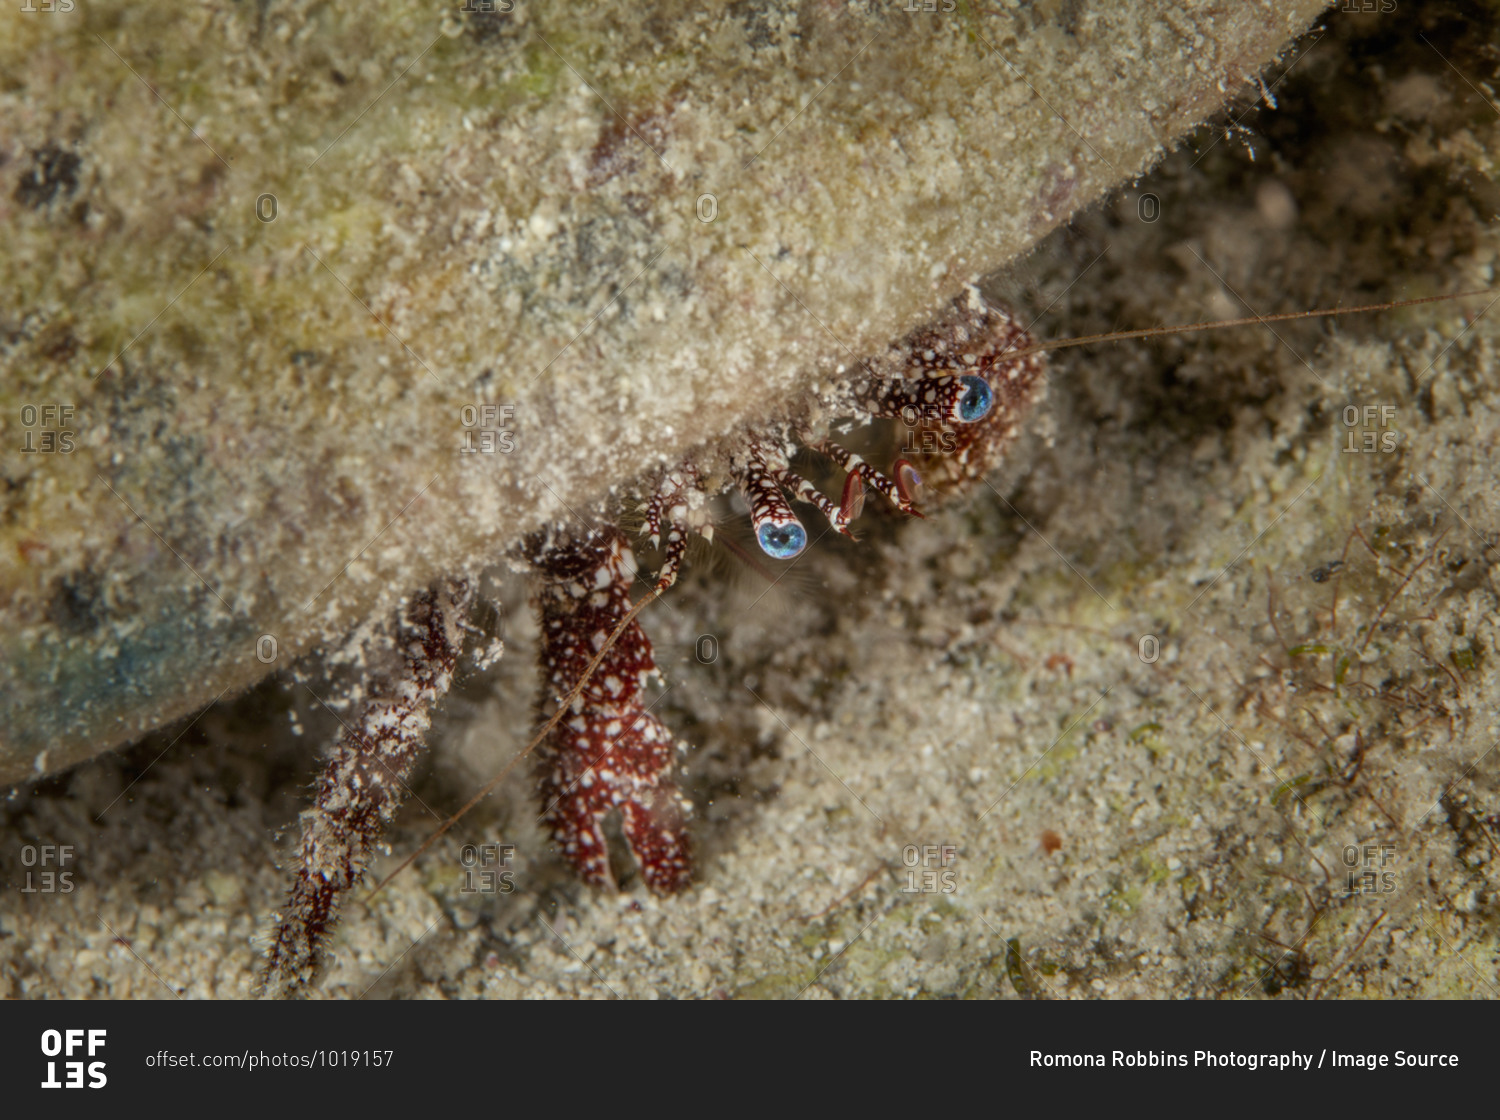 Underwater view of a large hermit crab with blue eyes, close
up, Eleuthera, Bahamas stock photo - OFFSET